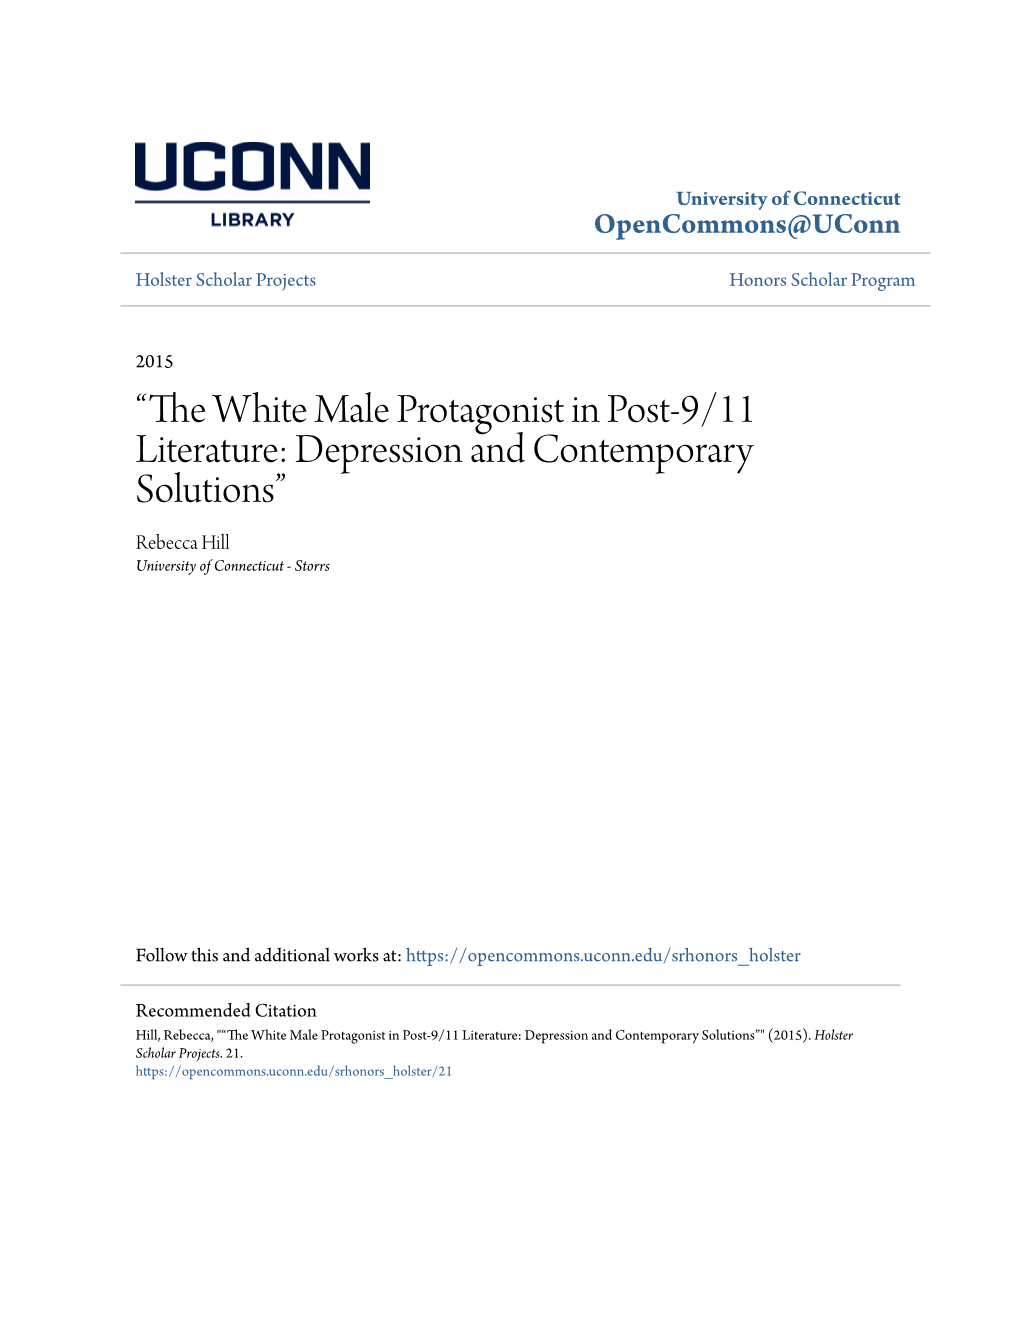 The White Male Protagonist in Post-9/11 Literature: Depression and Contemporary Solutions” Rebecca Hill University of Connecticut - Storrs